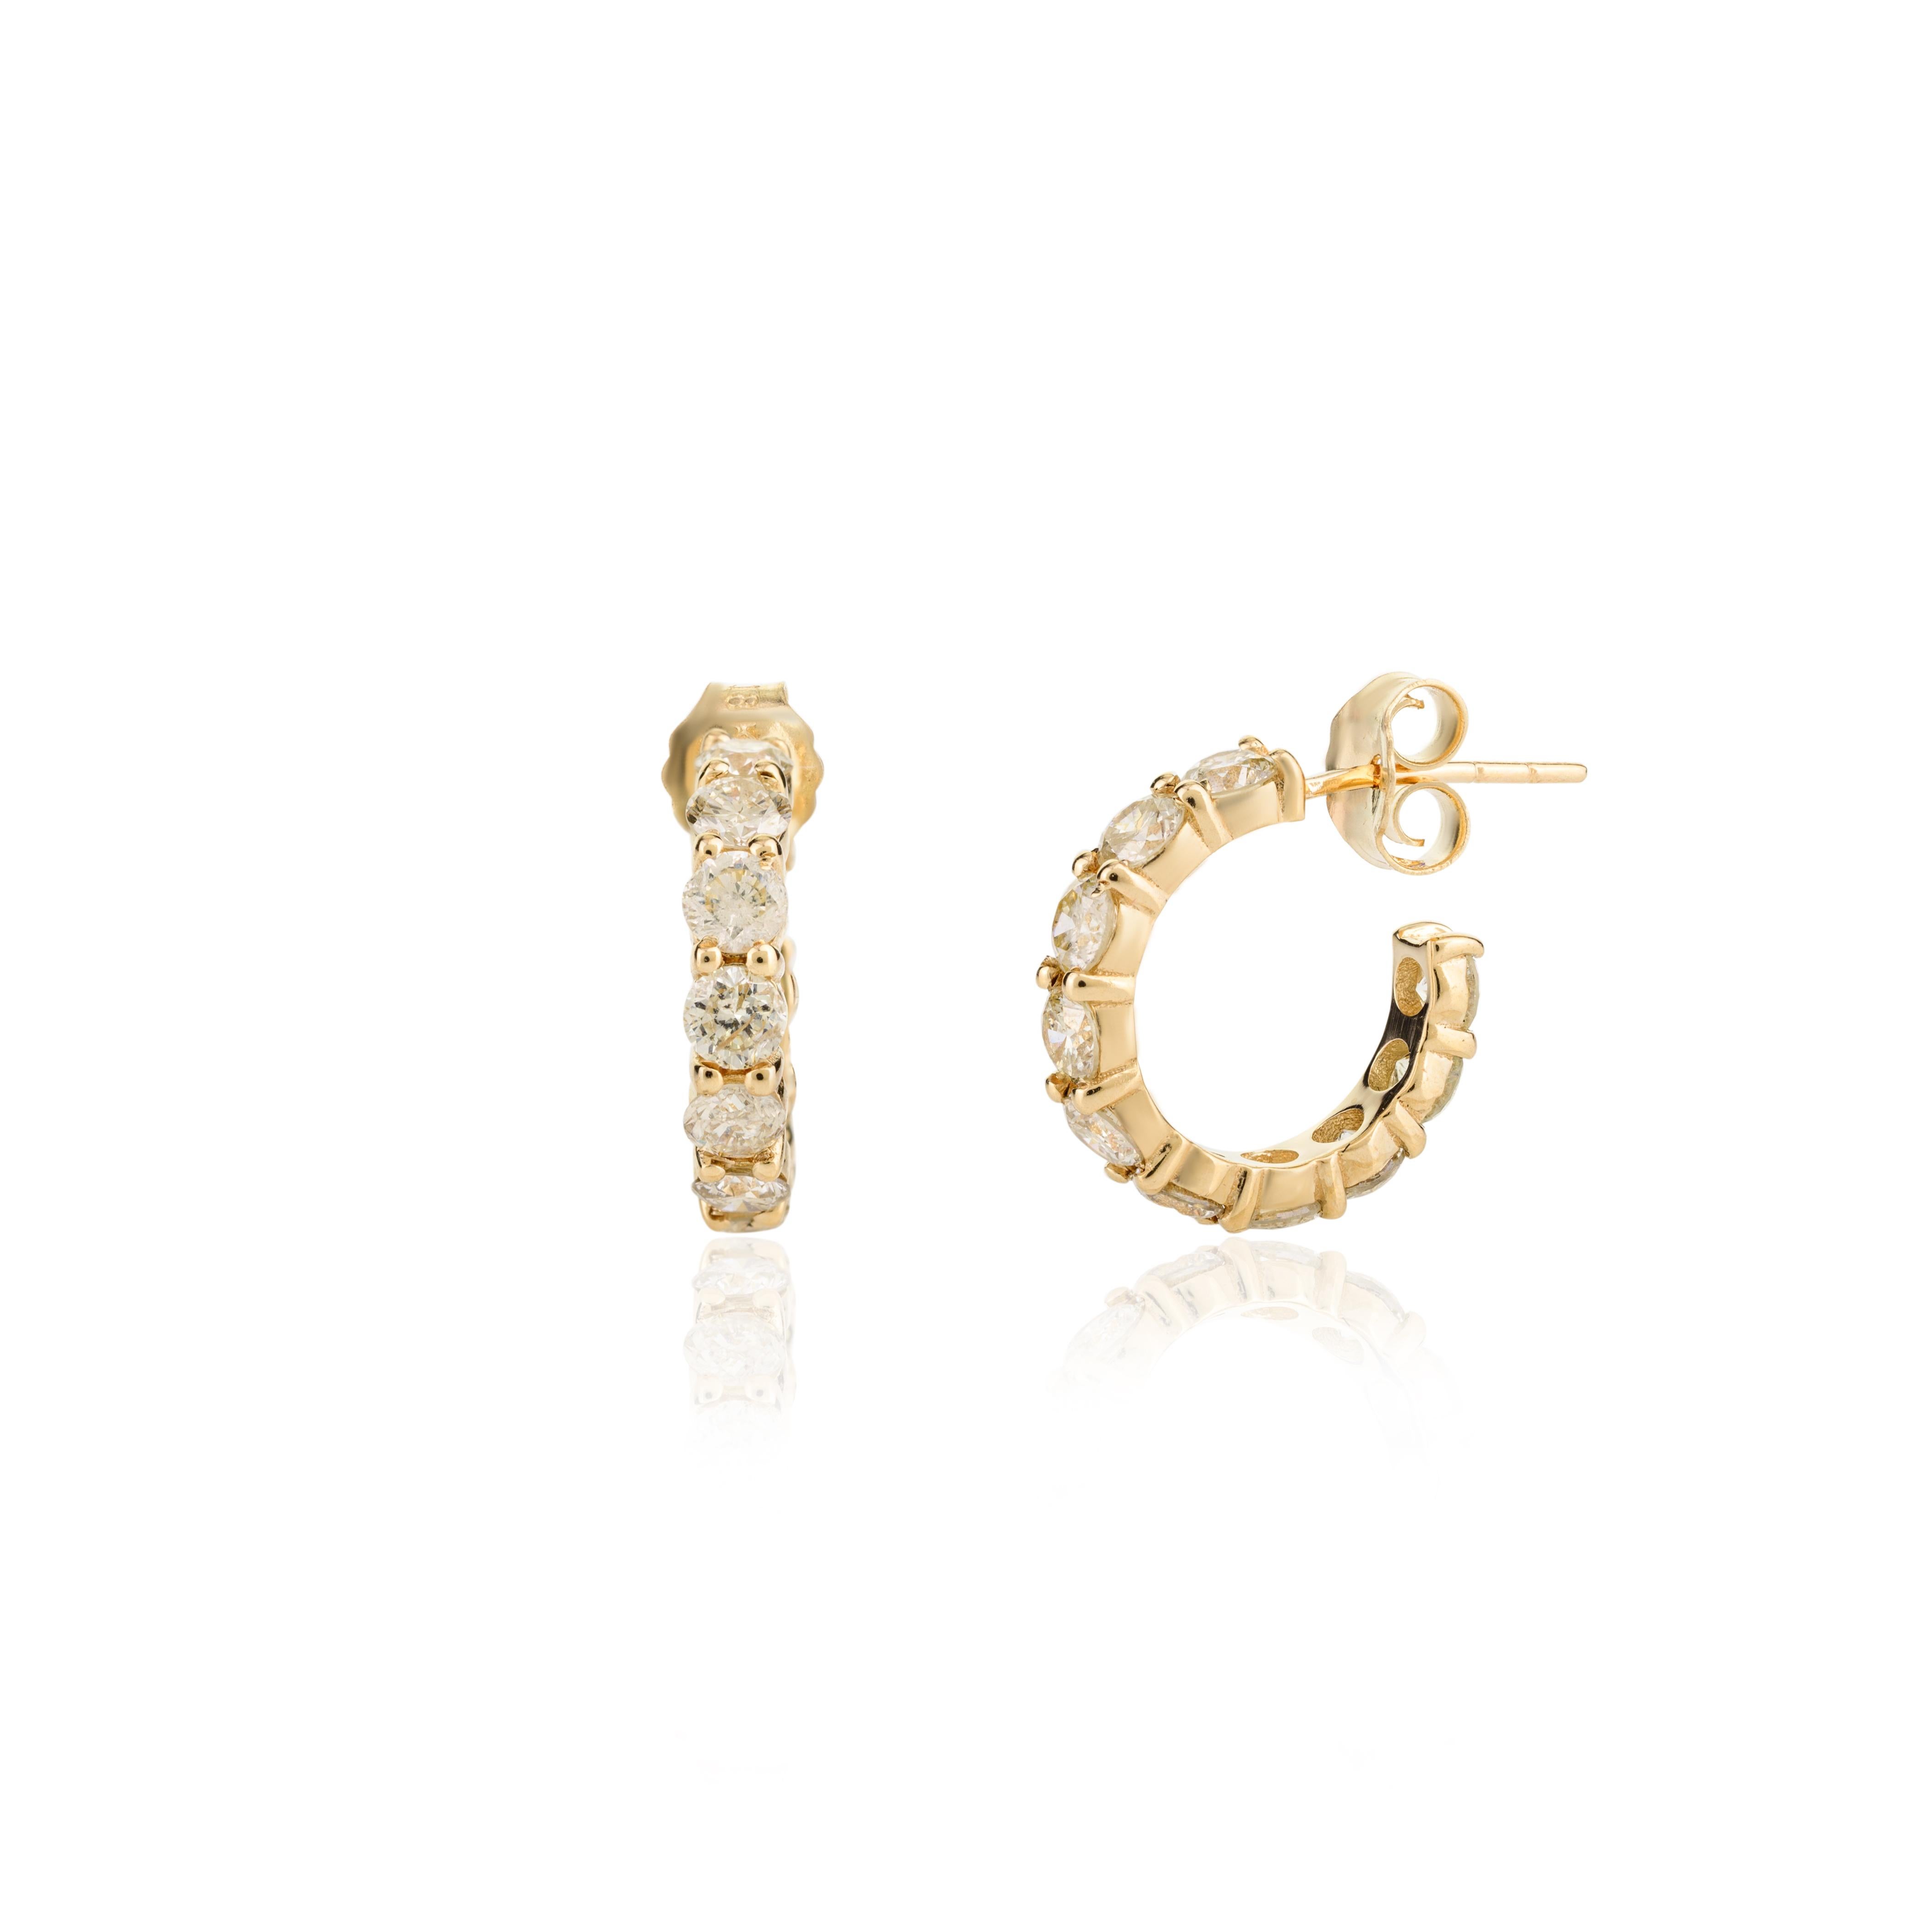 Dainty Everyday Diamond Hoop Earrings in 18k Yellow Gold Perfect Gift for Her For Sale 1